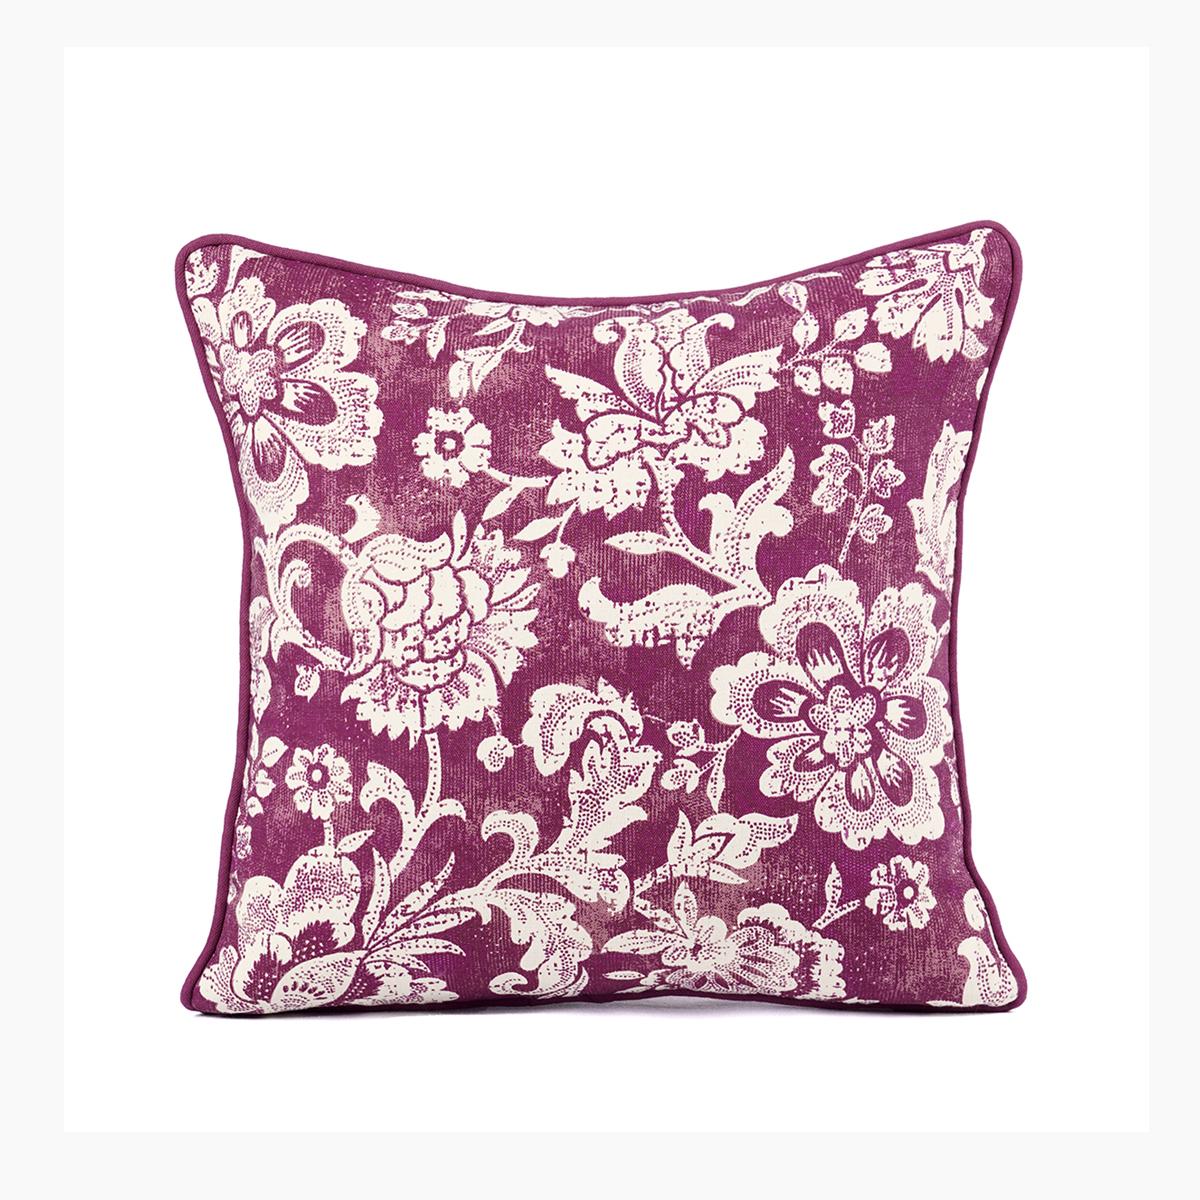 Plum DOMINOTERIE bold floral print cotton pillow cover, sizes available